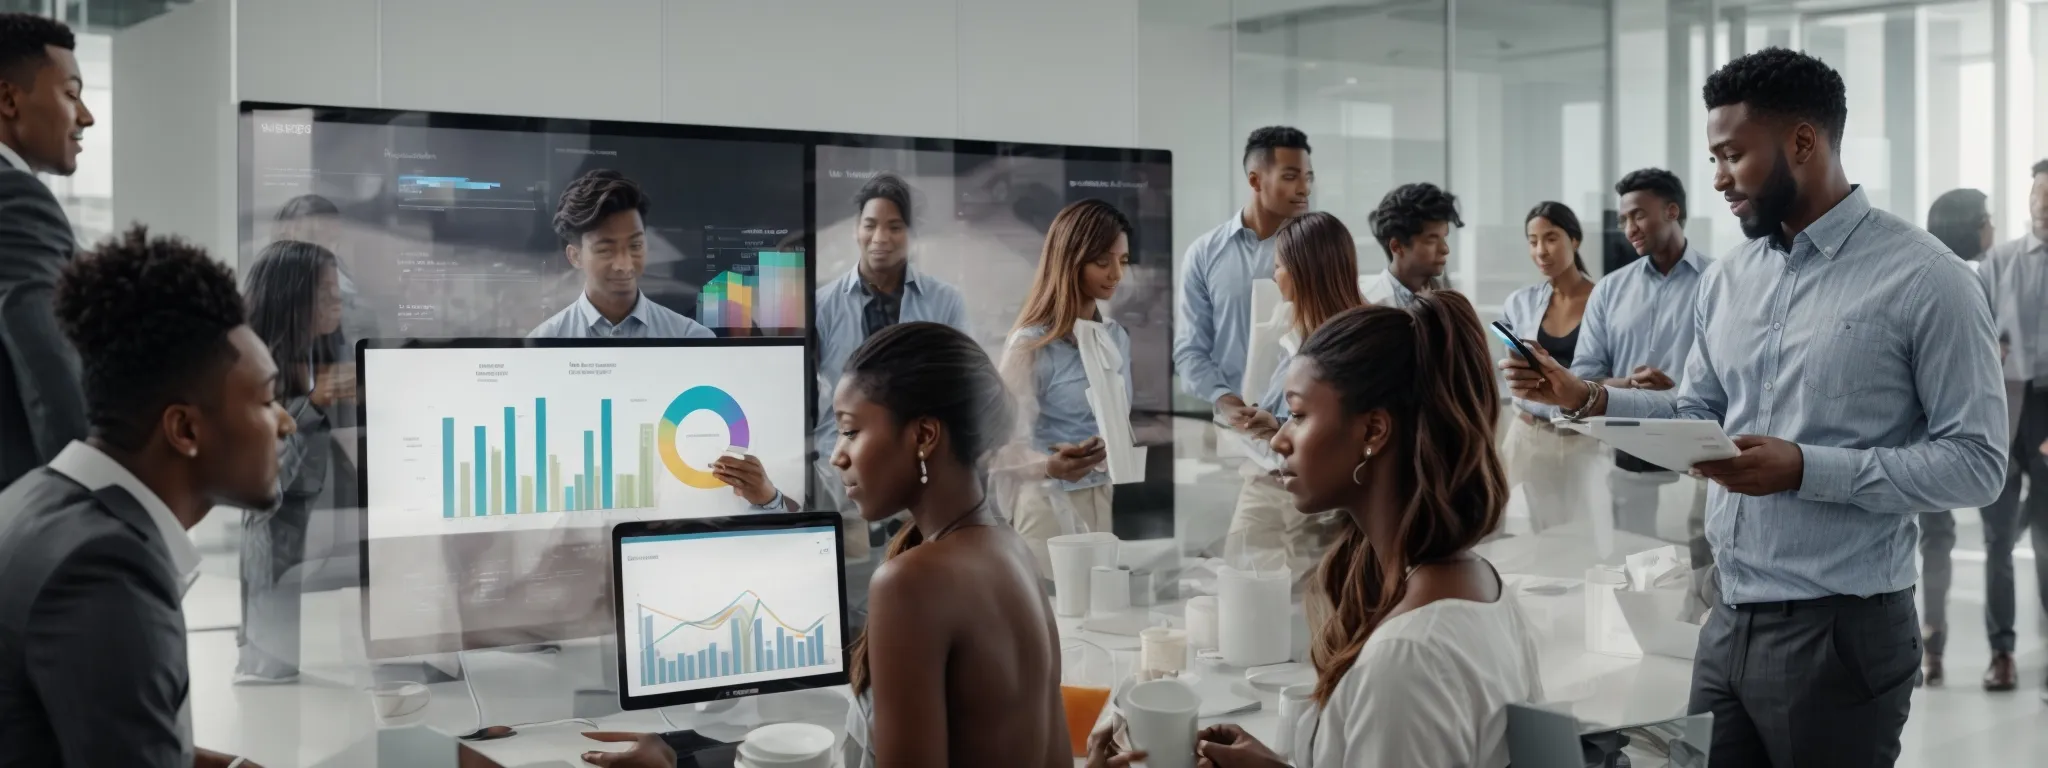 a group of diverse individuals engaging with an infographic displayed on a large, sleek touchscreen in a bright, modern office setting.